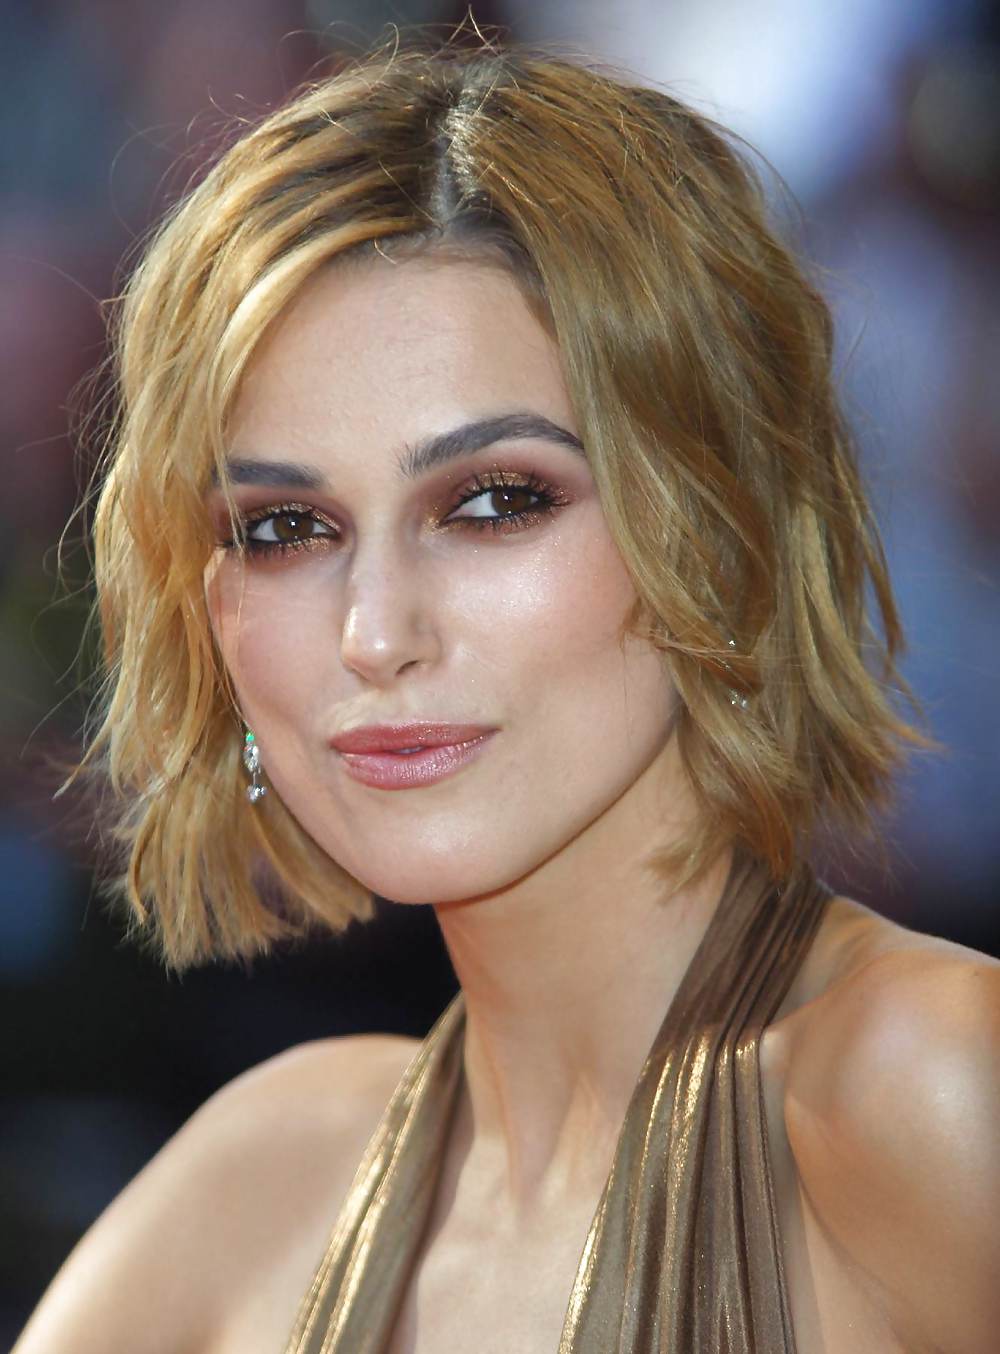 Keira Knightley The Royal Lady of England #35650355